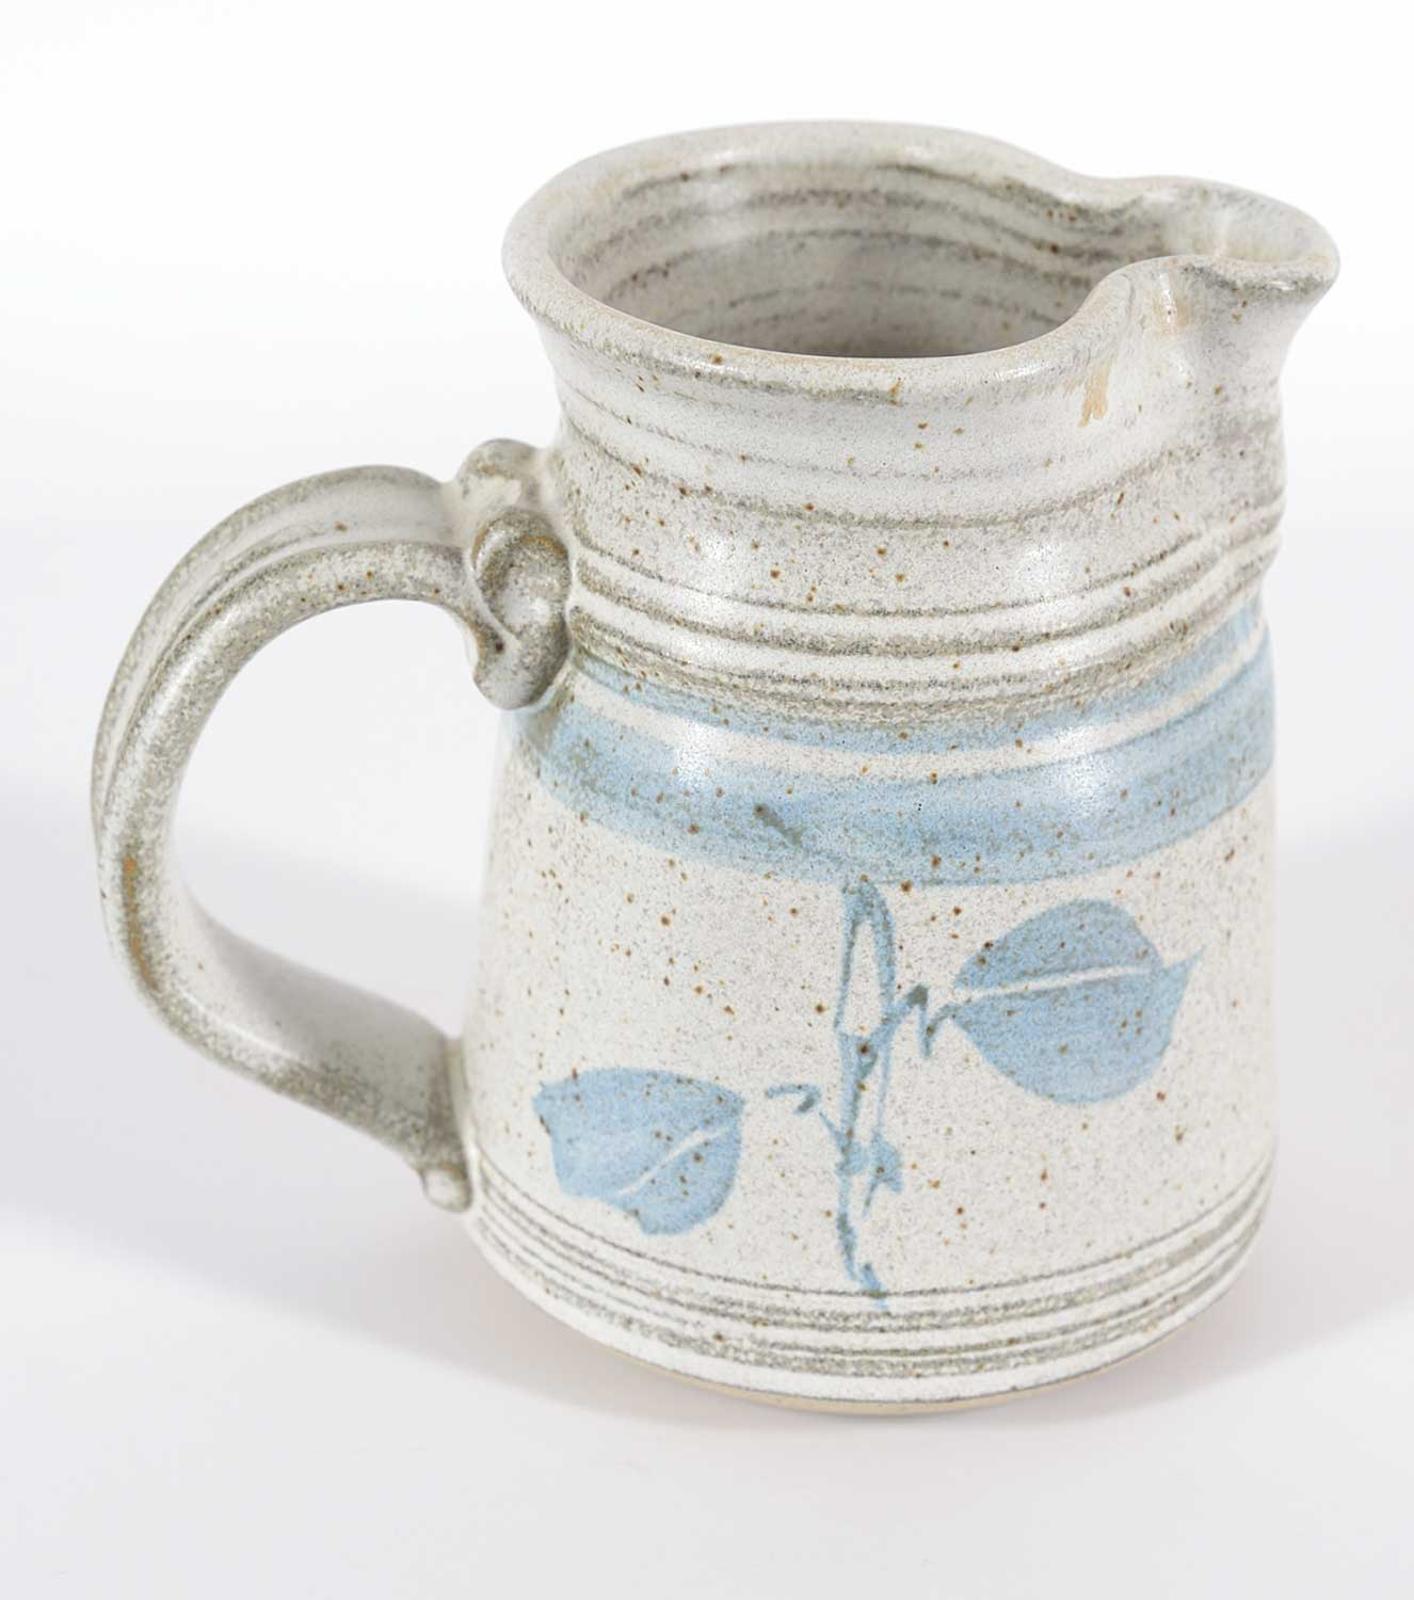 Connie Pike - Pitcher with Blue Leaf Design